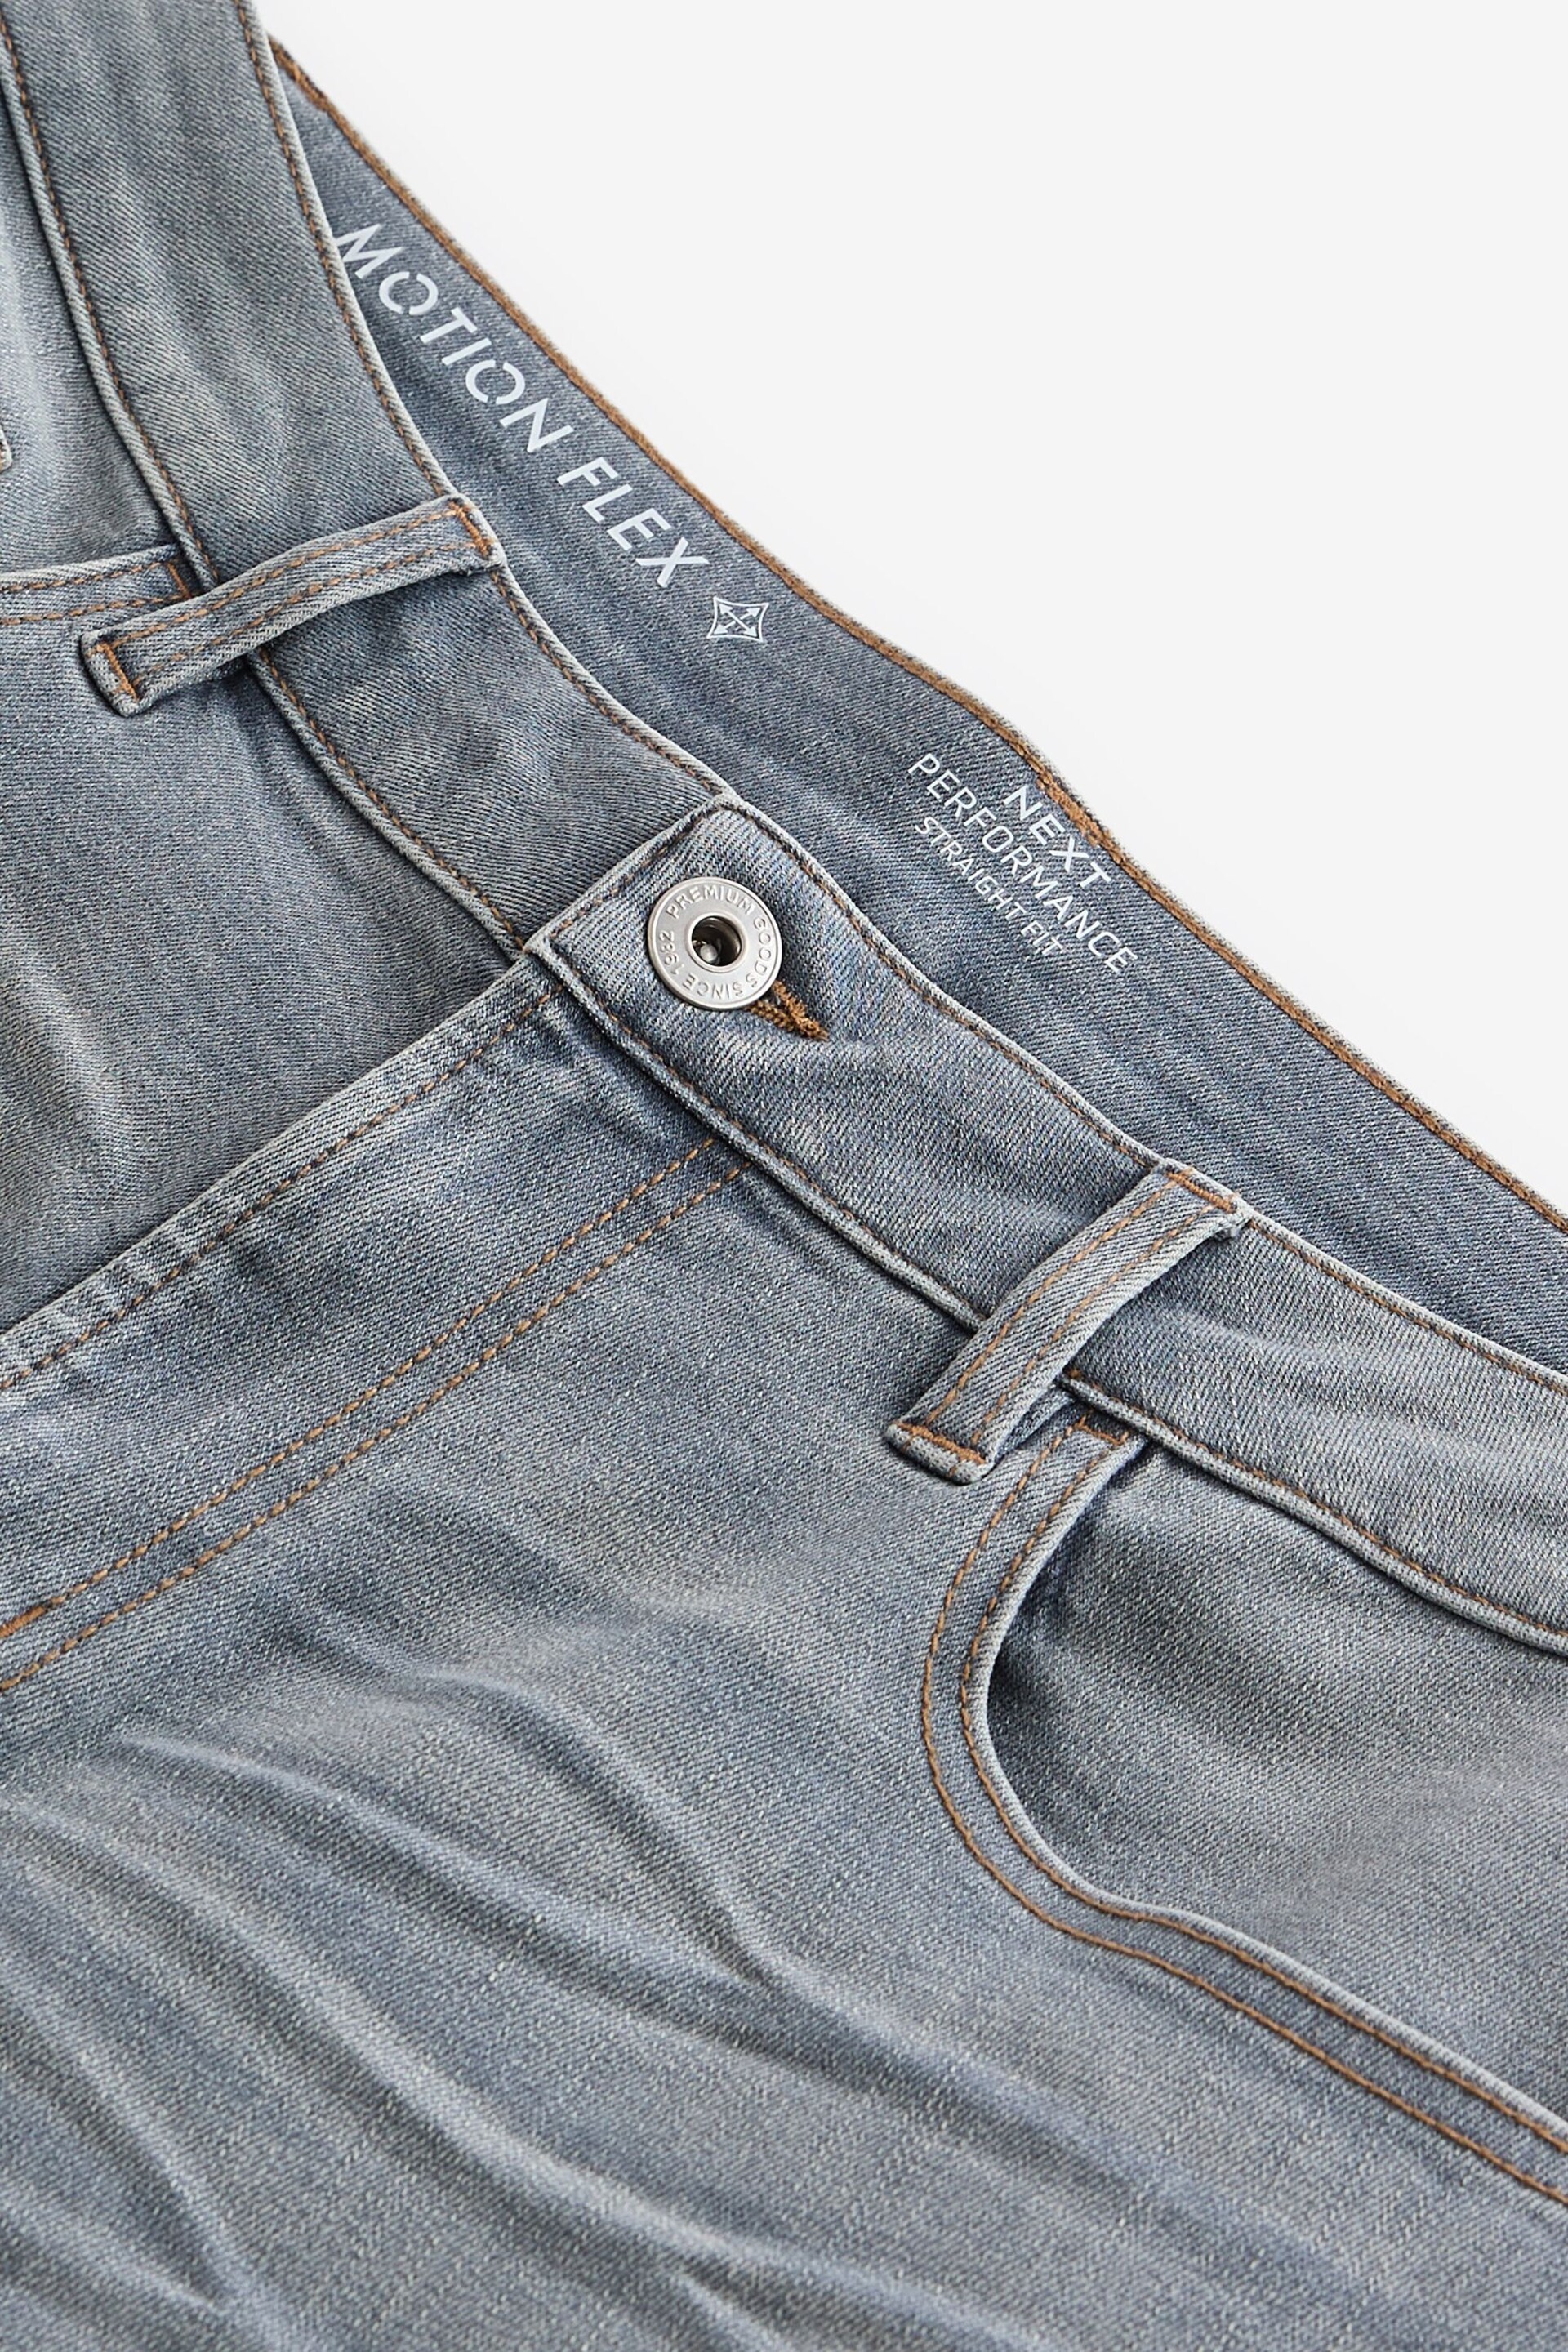 Light Grey Straight Fit Motion Flex Jeans - Image 11 of 12